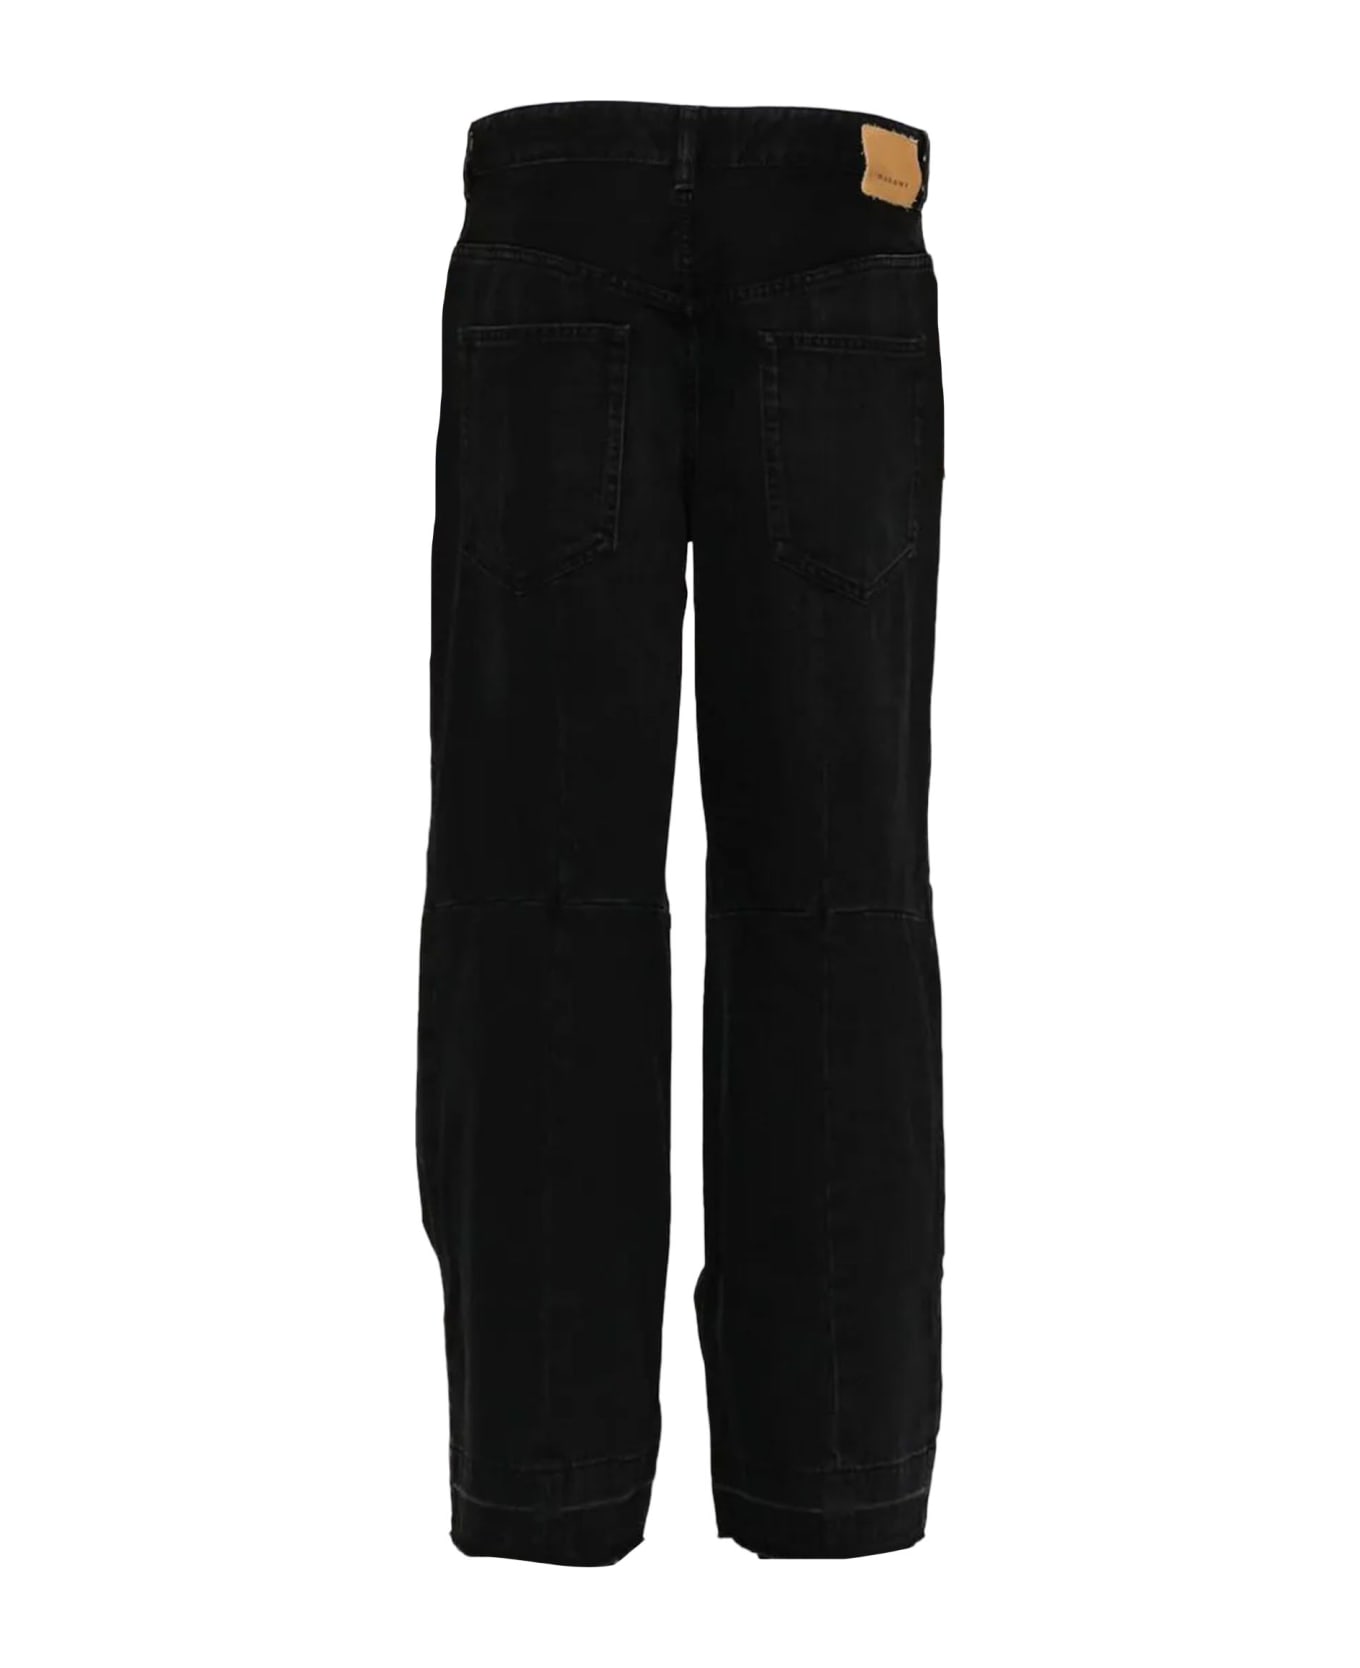 Isabel Marant Cotton Blend Trousers - Nero ボトムス